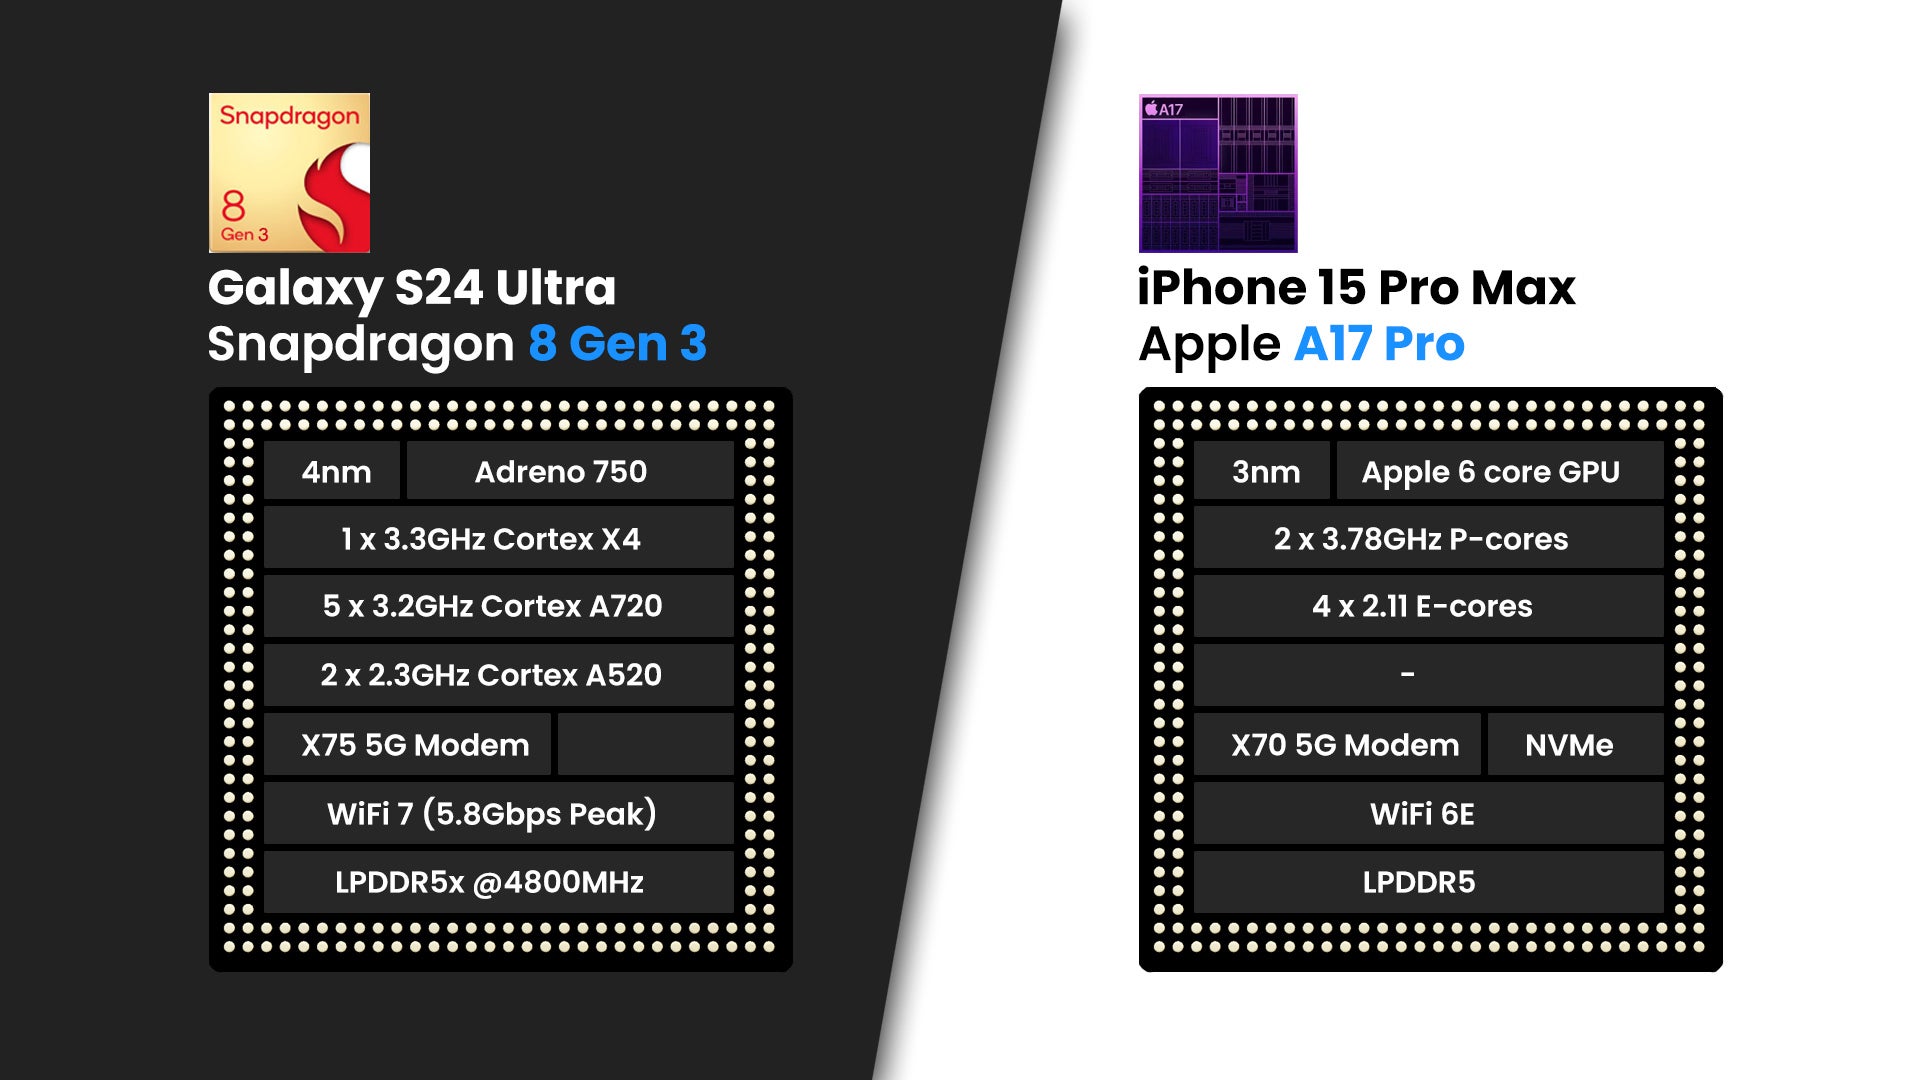 Snapdragon 8 Gen 3 vs A17 Pro preliminary specs image by PhoneArena - Samsung Galaxy S24 Ultra vs iPhone 15 Pro Max: expected differences